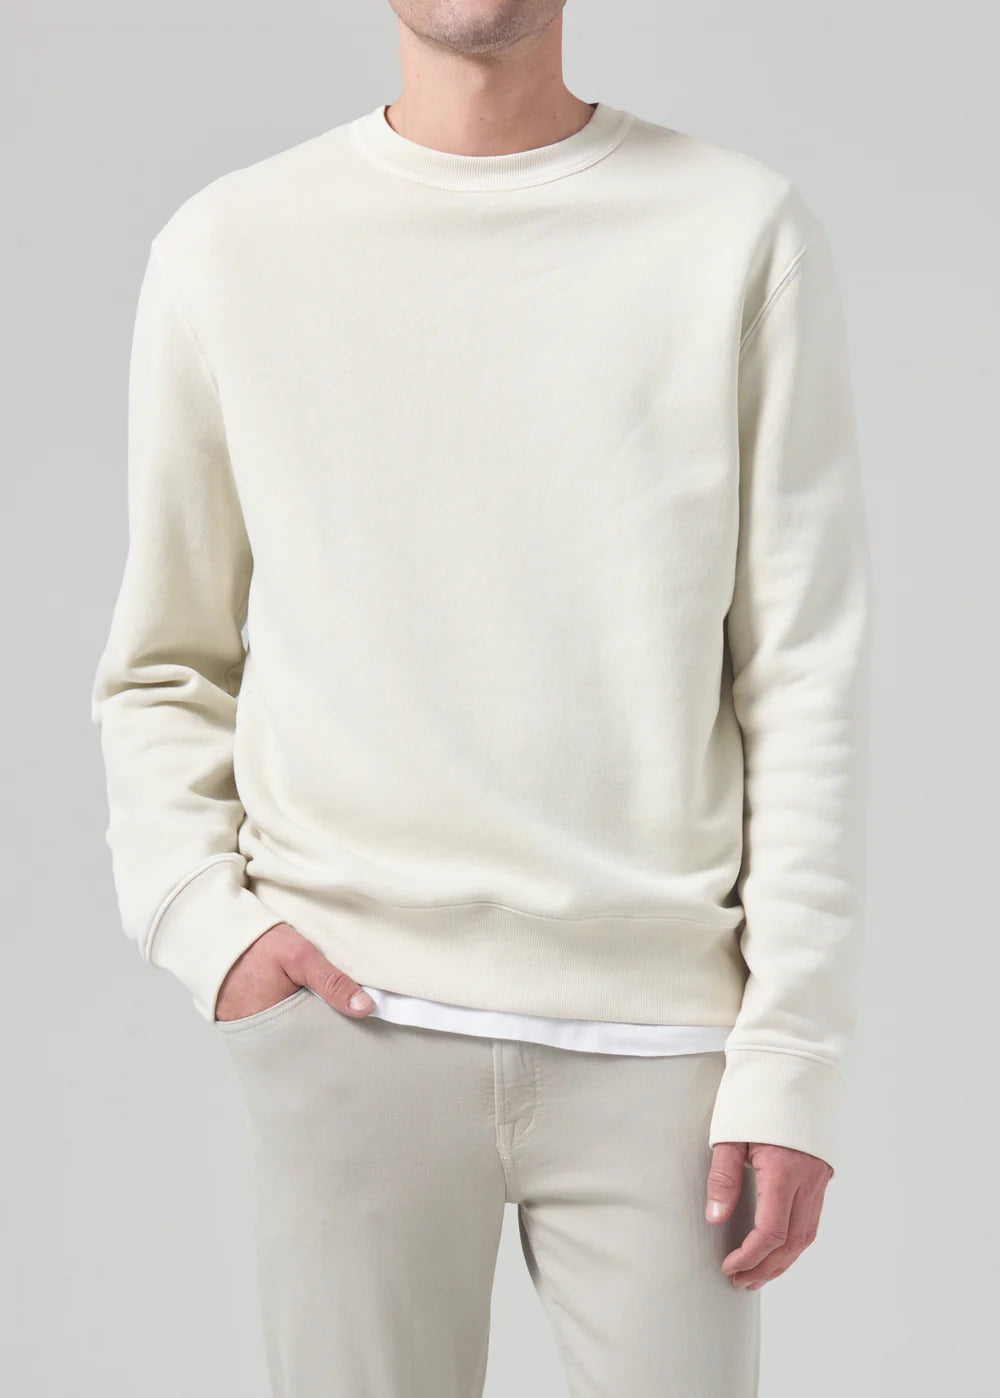 Front view of a model wearing the Vintage crewneck sweater from Citizens of Humanity in off-white cream color. Showcases the regular, comfy fit.